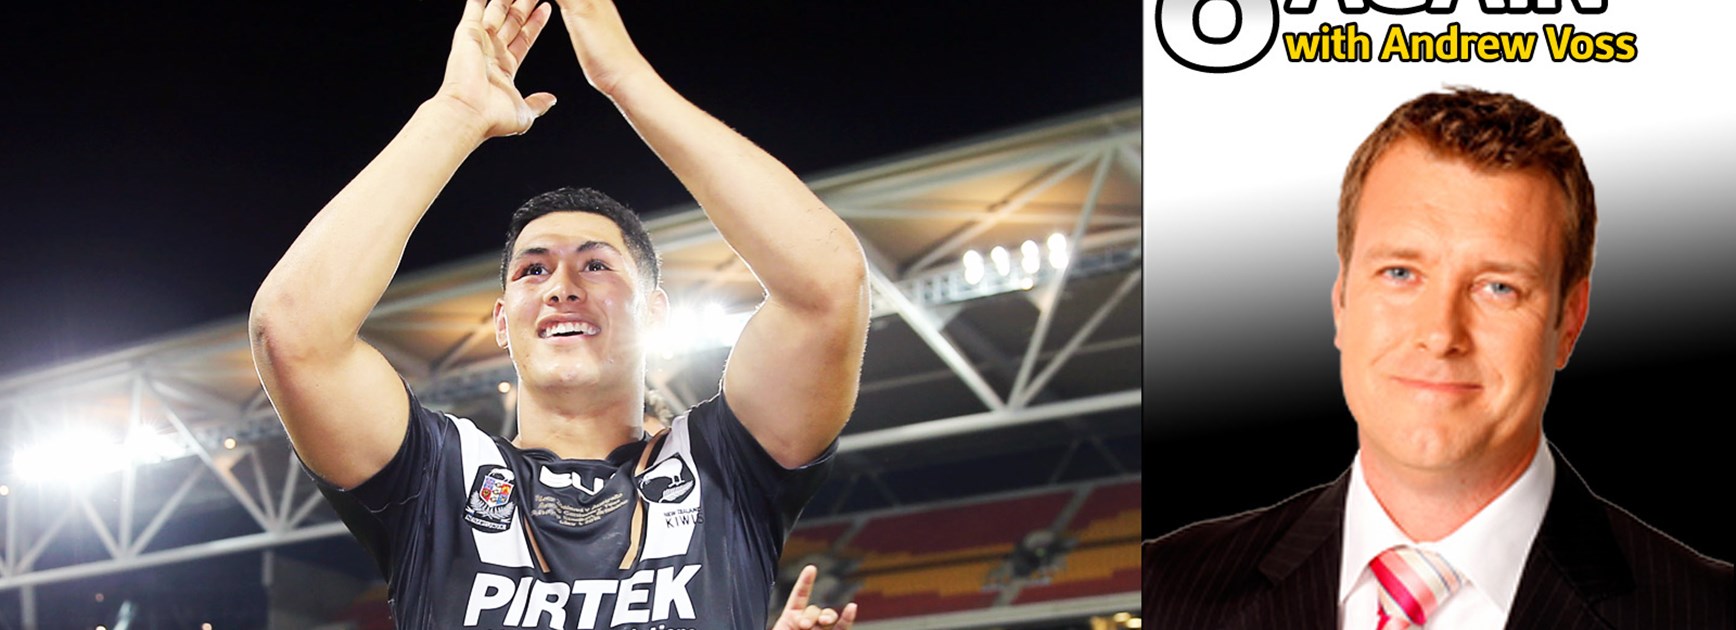 Andrew Voss is predicting big things from Kiwis fullback Roger Tuivasa-Sheck at the Rugby League World Cup.